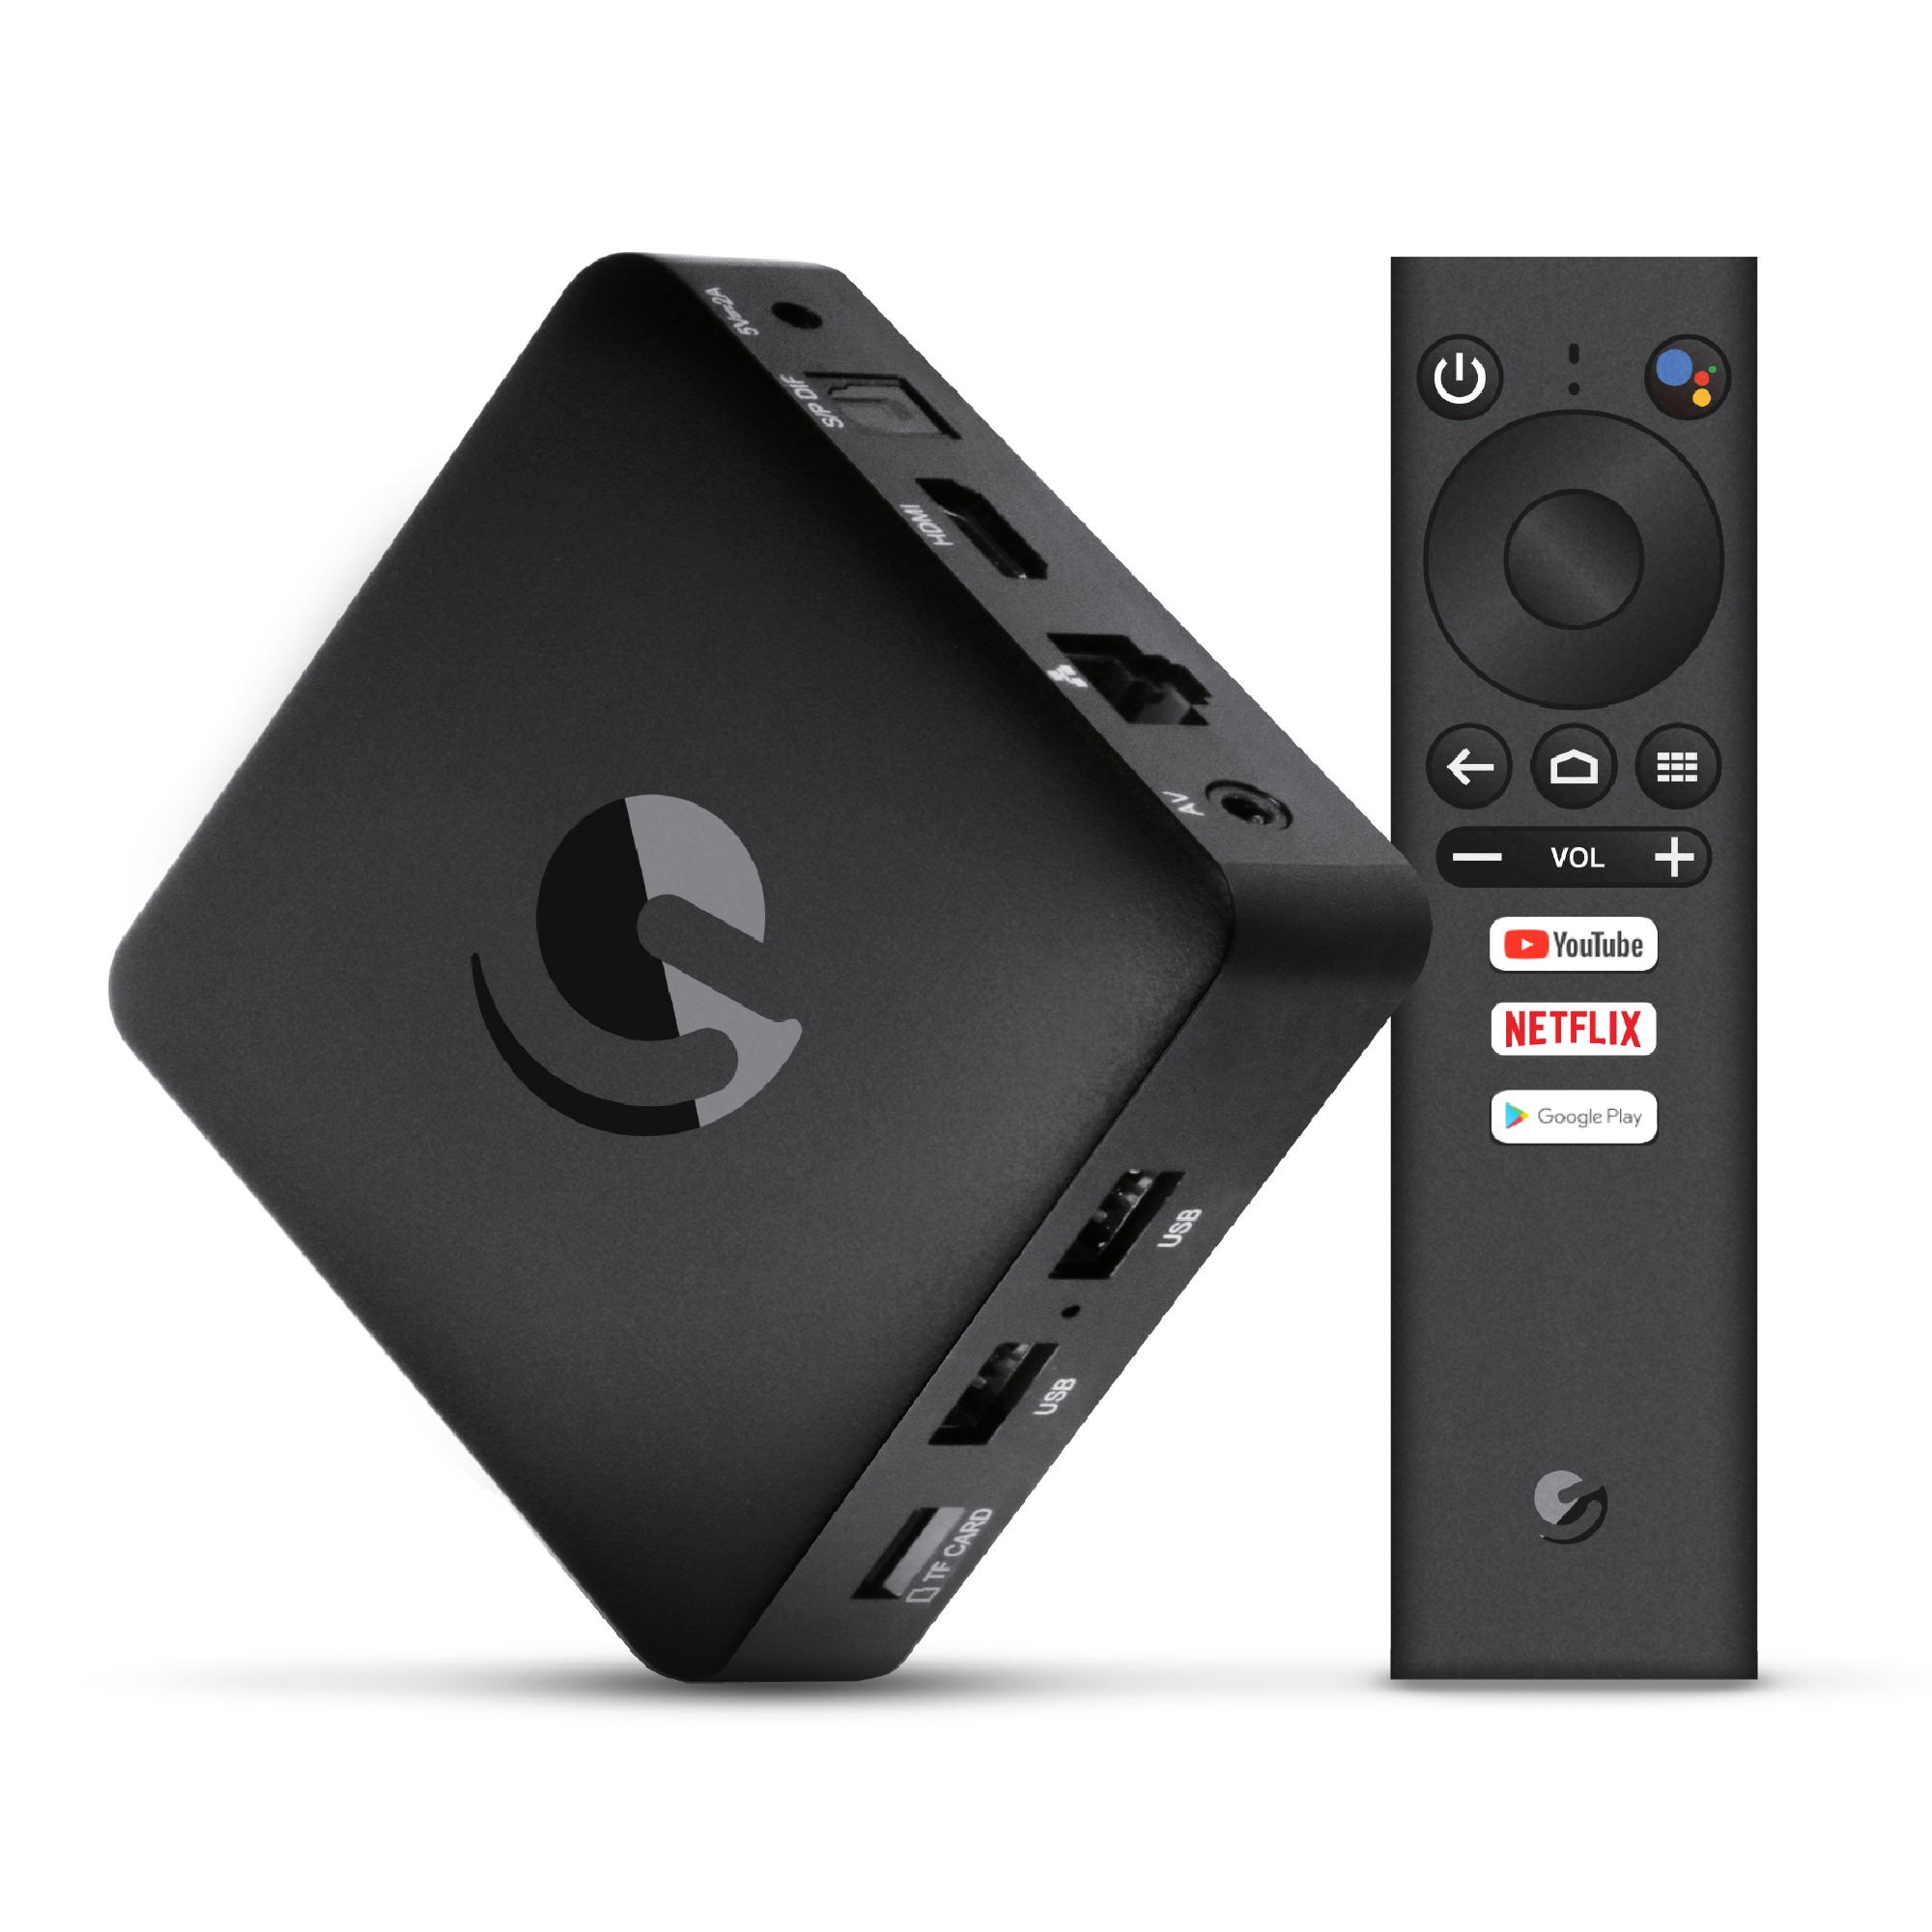 Walmart Starts Selling a New Android TV Box Called Jetstream